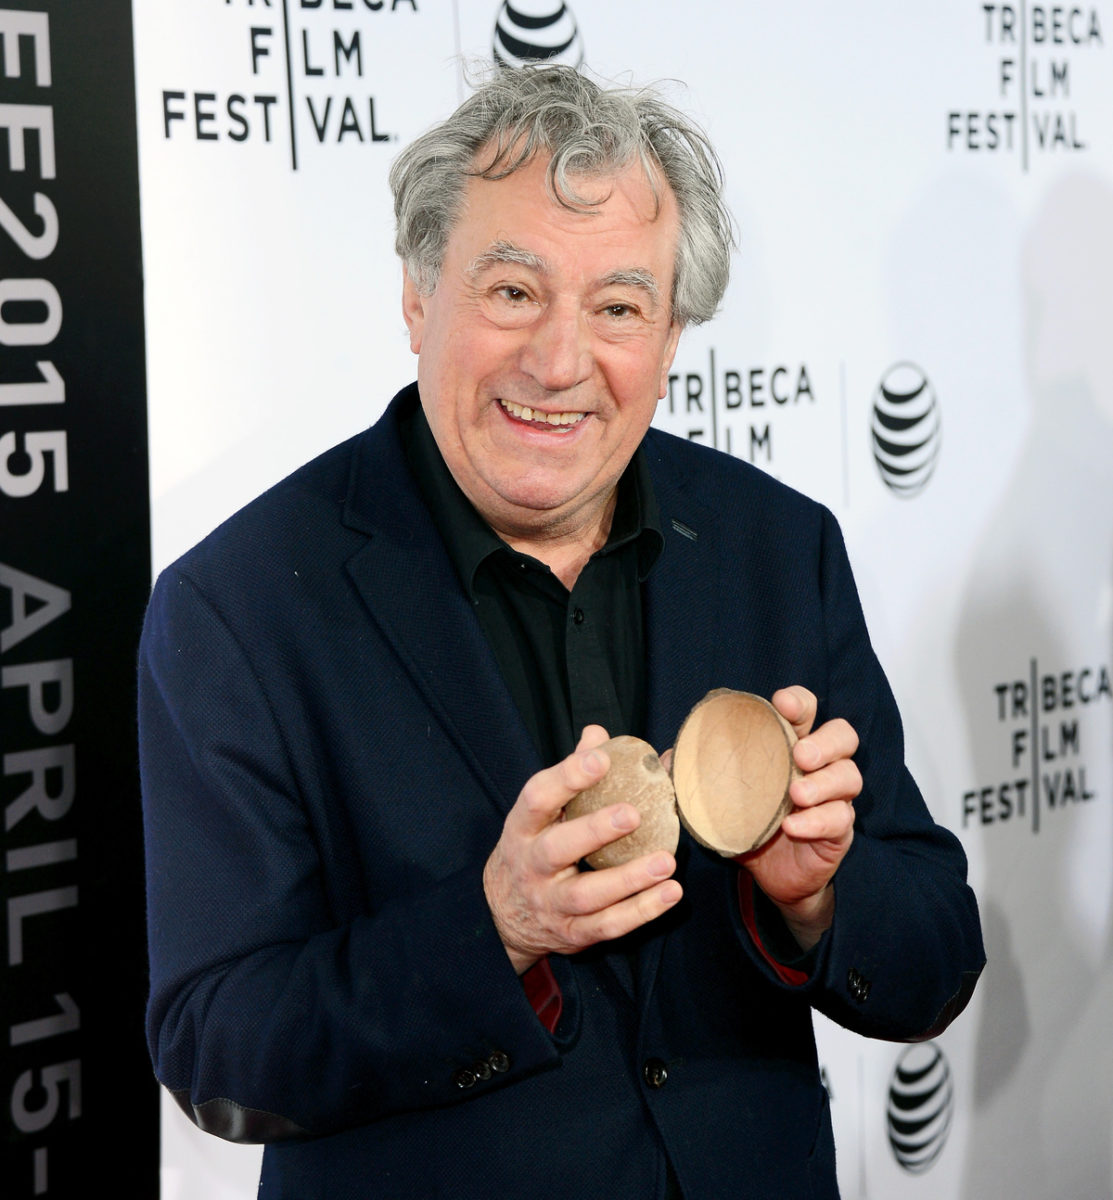 NEW YORK, NY - APRIL 24: Actor Terry Jones attends the "Monty Python And The Holy Grail" Special Screening during the 2015 Tribeca Film Festival at Beacon Theatre on April 24, 2015 in New York City. (Photo by Stephen Lovekin/Getty Images for the 2015 Tribeca Film Festival)